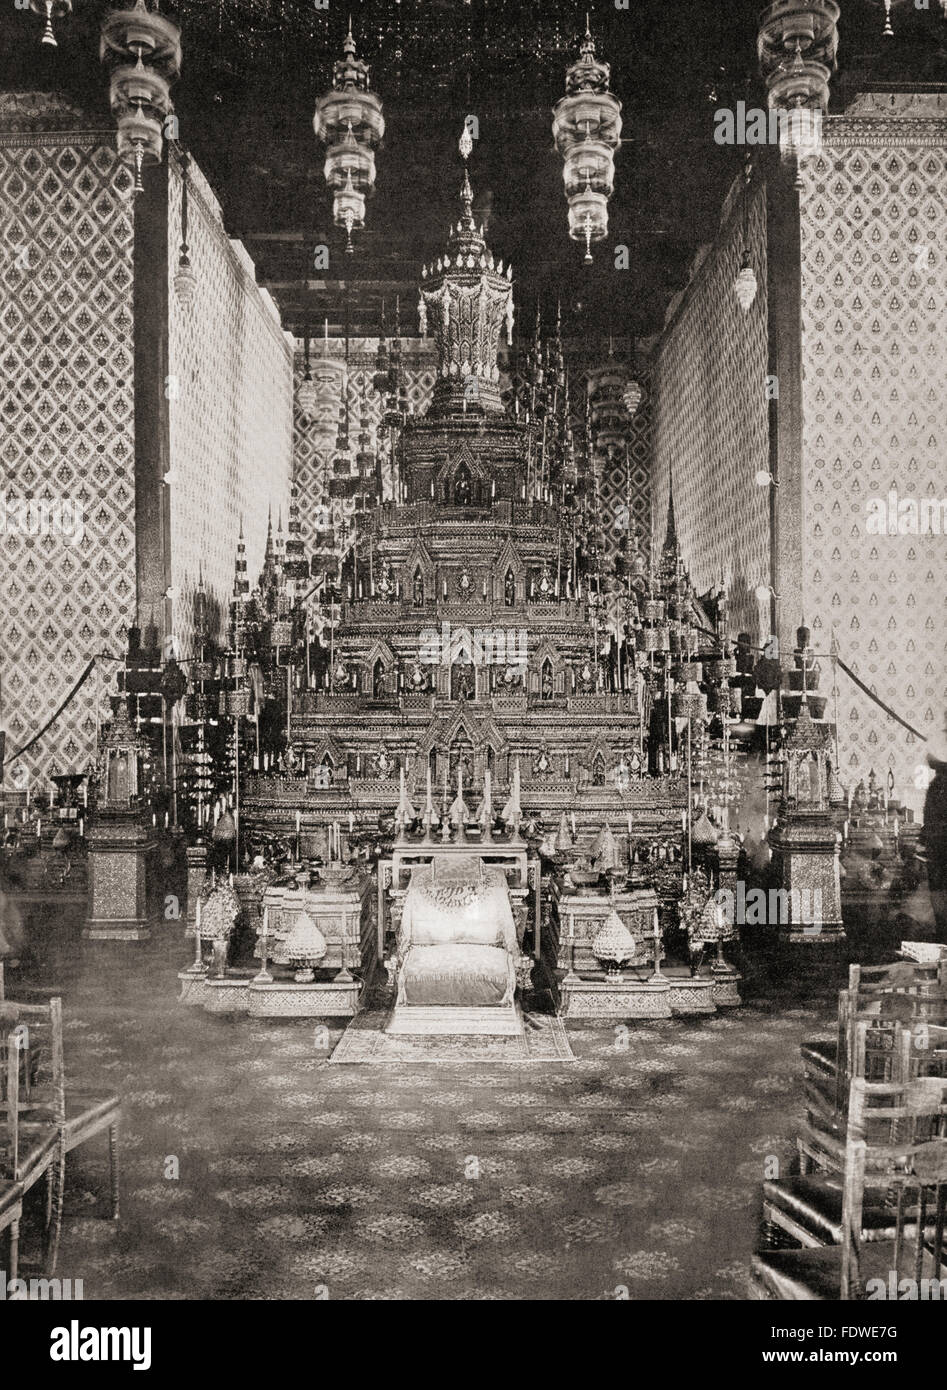 The body of the late King Chulalonkorn, aka King Rama V, 1853 – 1910, placed in a golden urn where it remained for many months in state on the top of a beautiful golden pyramid in the Dusit Palace, Bangkok, Thailand, formerly Siam.  Fifth monarch of Siam under the House of Chakri. After a 19th century photograph. Stock Photo